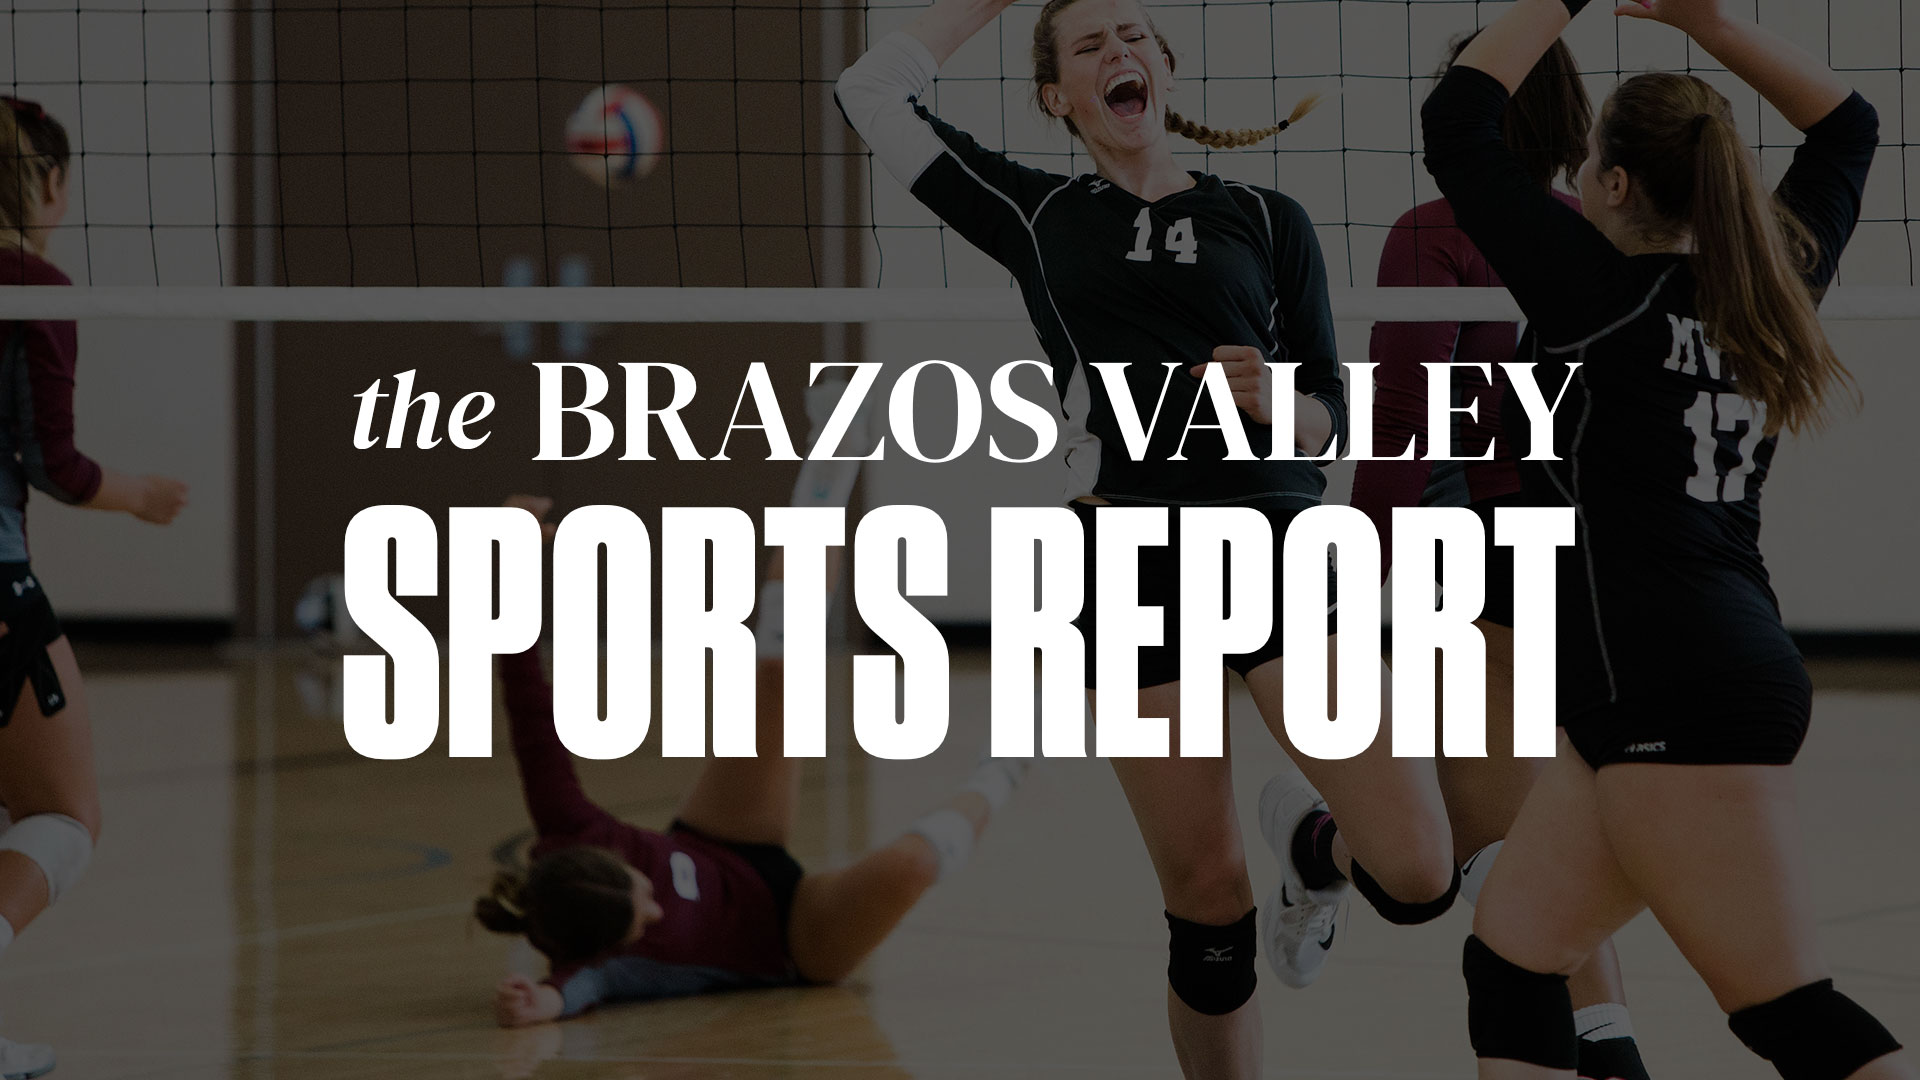 The Brazos Valley Sports Report